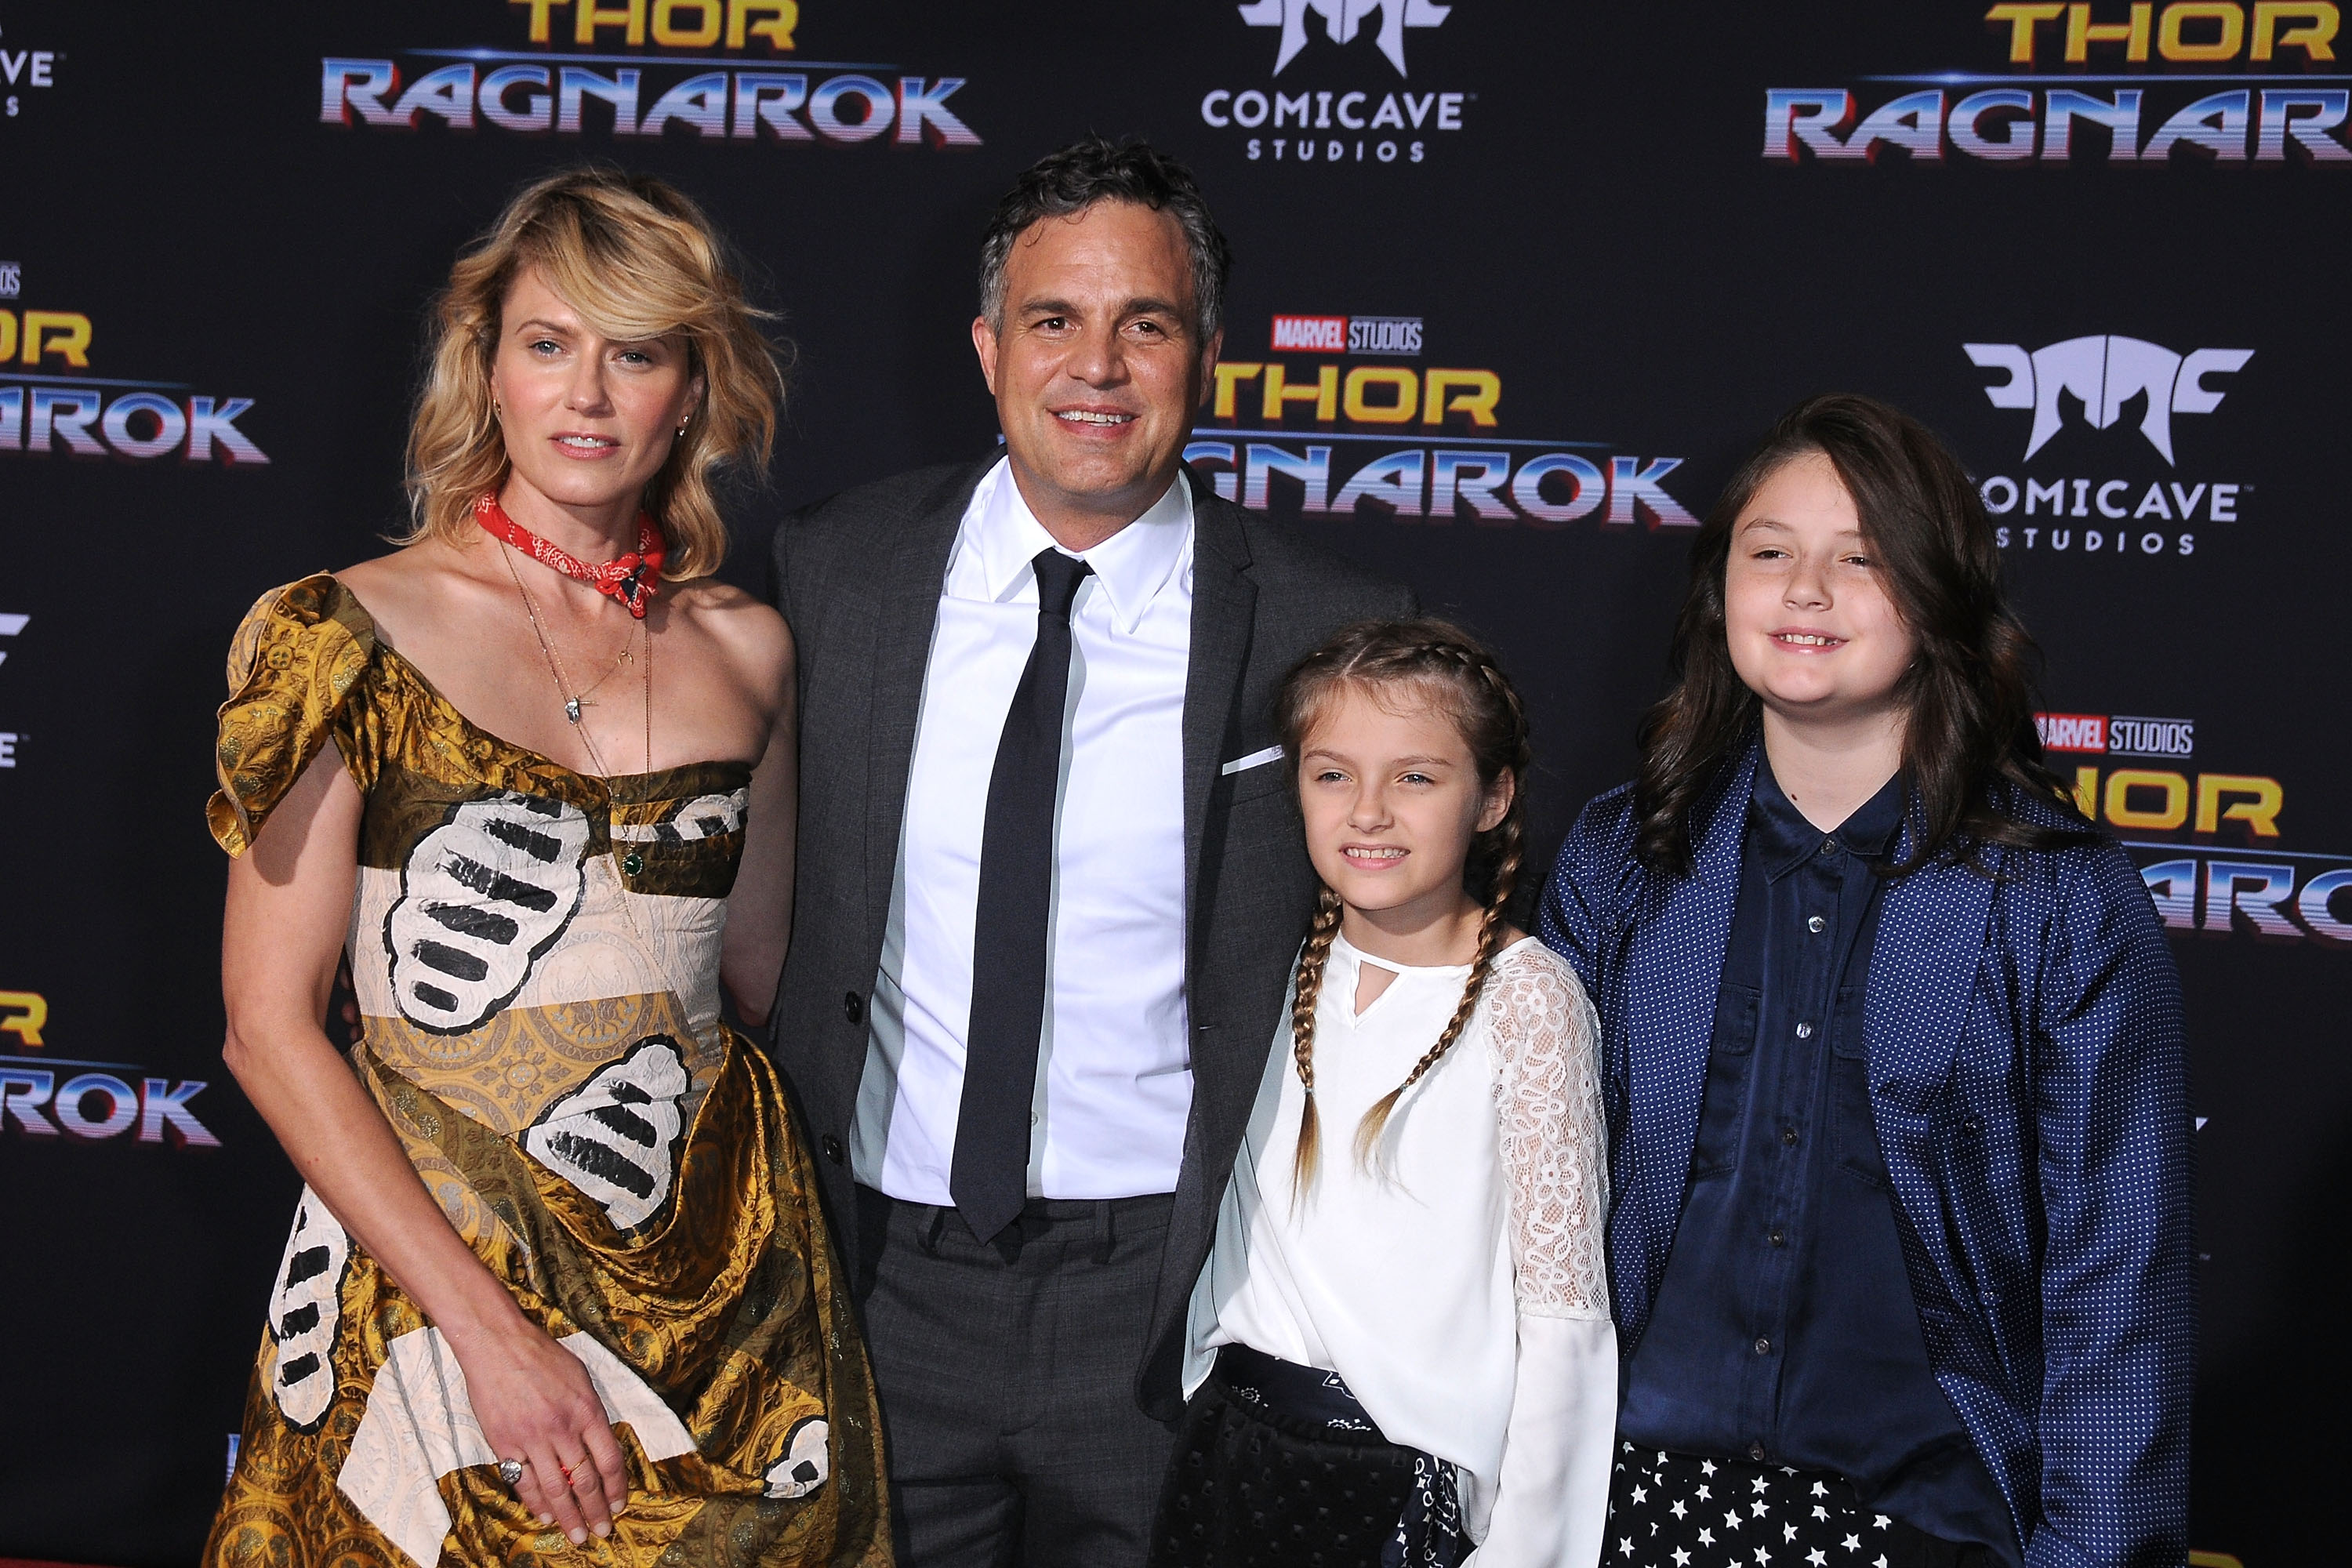 Sunrise, Mark, Odette, and Bella Noche Ruffalo at the premiere of "Thor: Ragnarok" in Los Angeles, California on October 10, 2017 | Source: Getty Images